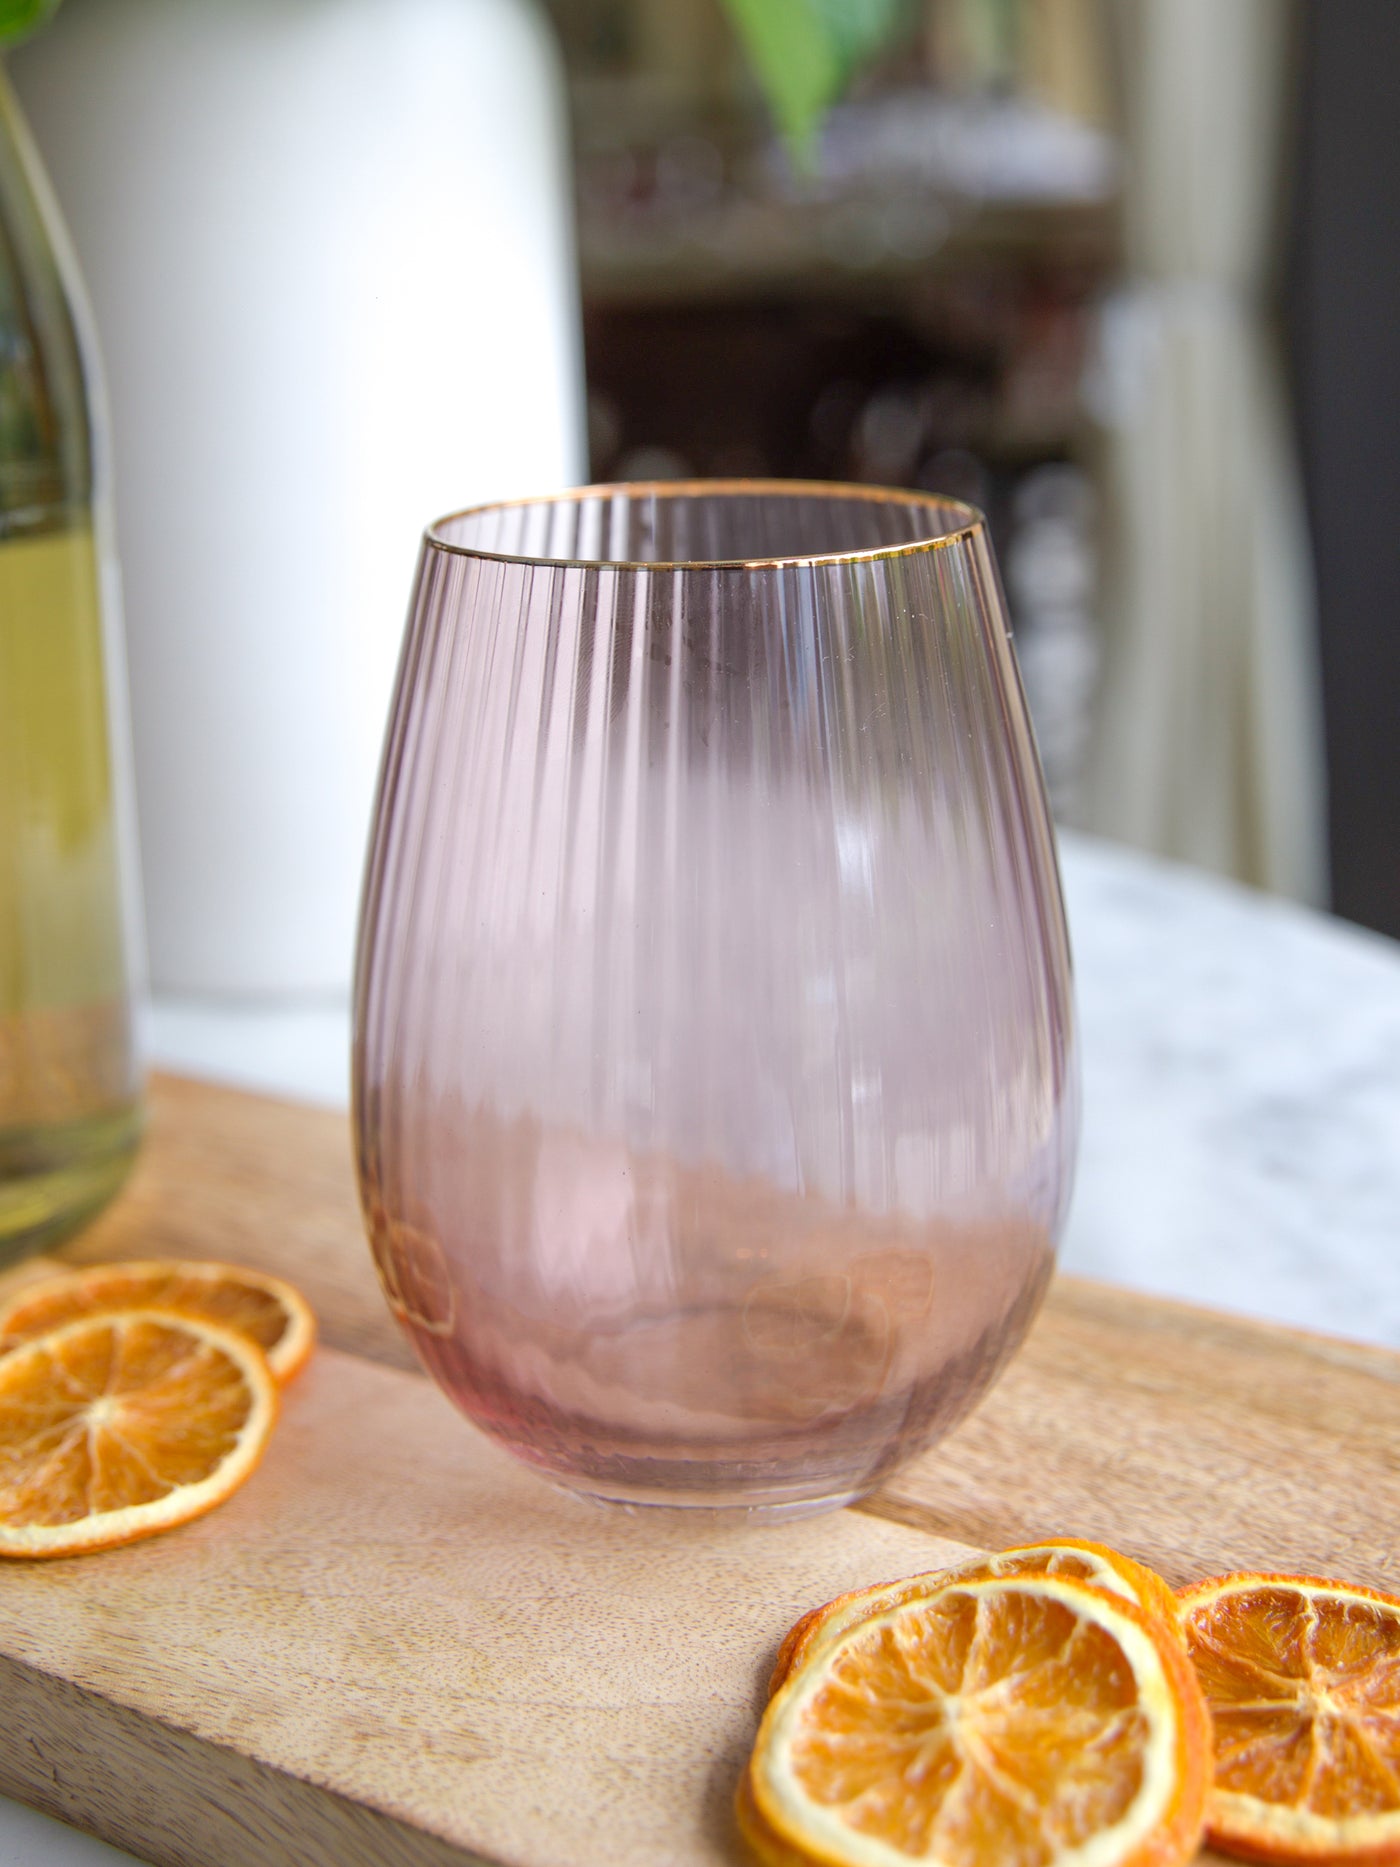 Stemless Wine Glass | Ribbed Mauve - Set of 4 - Mary Square, LLC